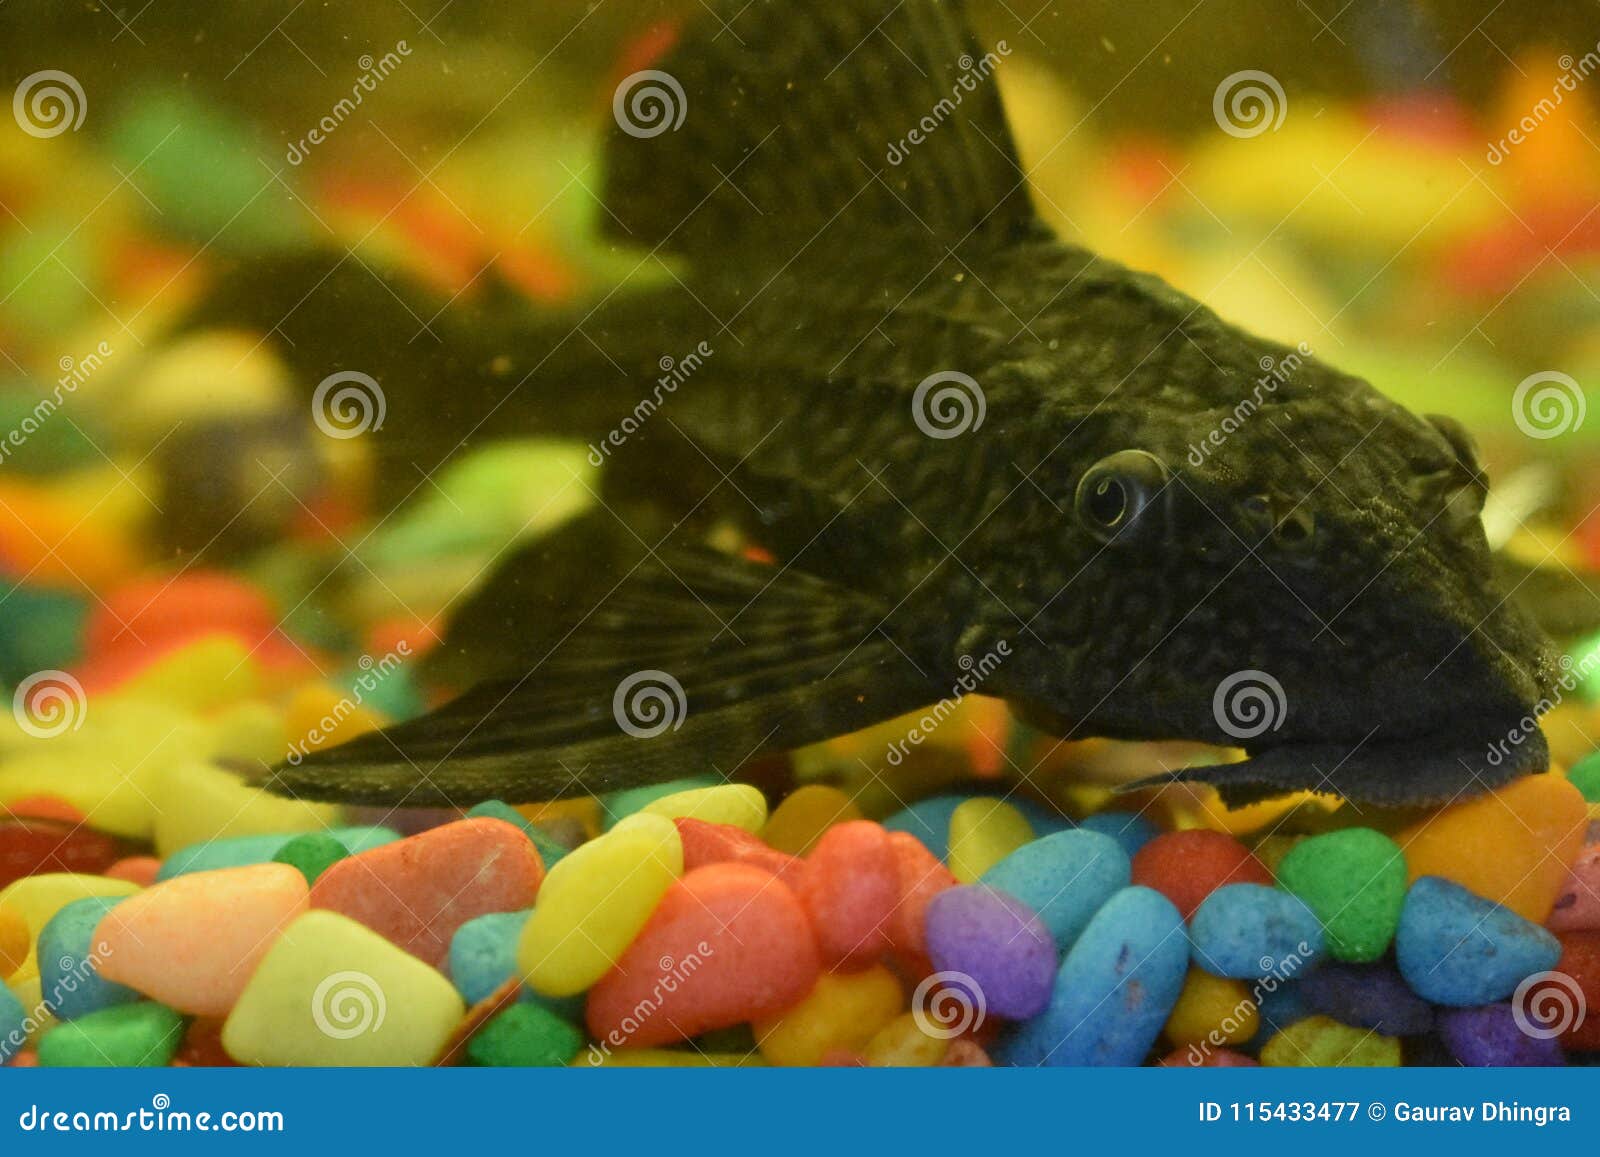 Plecostomus Fish the Tank Cleaner Stock Image - Image of tank, looks:  115433477